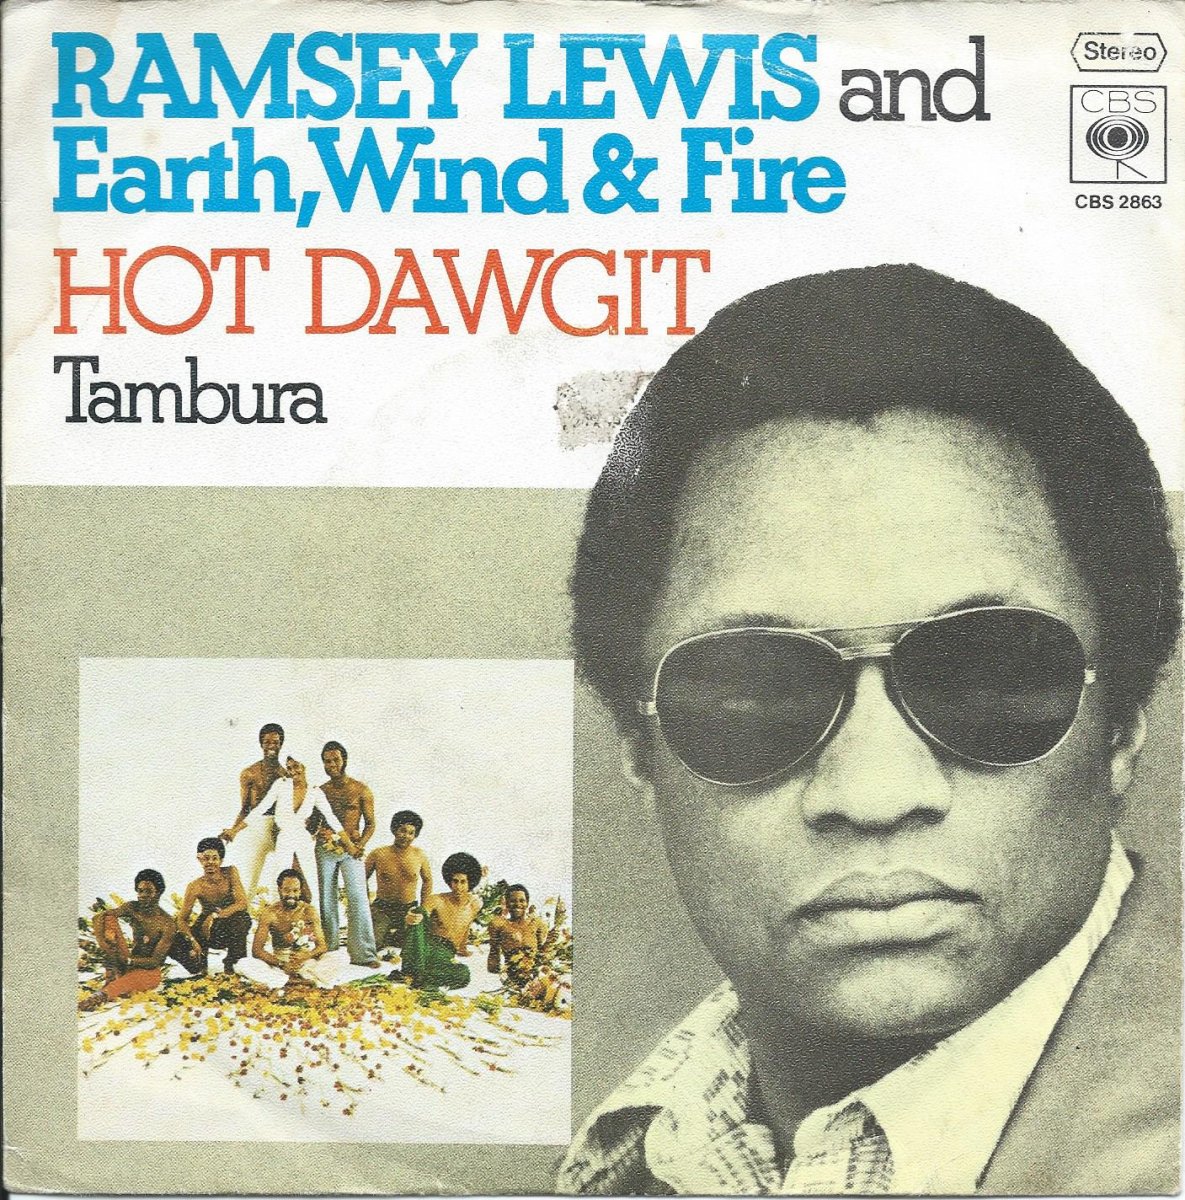 RAMSEY LEWIS AND EARTH,WIND & FIRE ‎/ HOT DAWGIT / TAMBURA (7